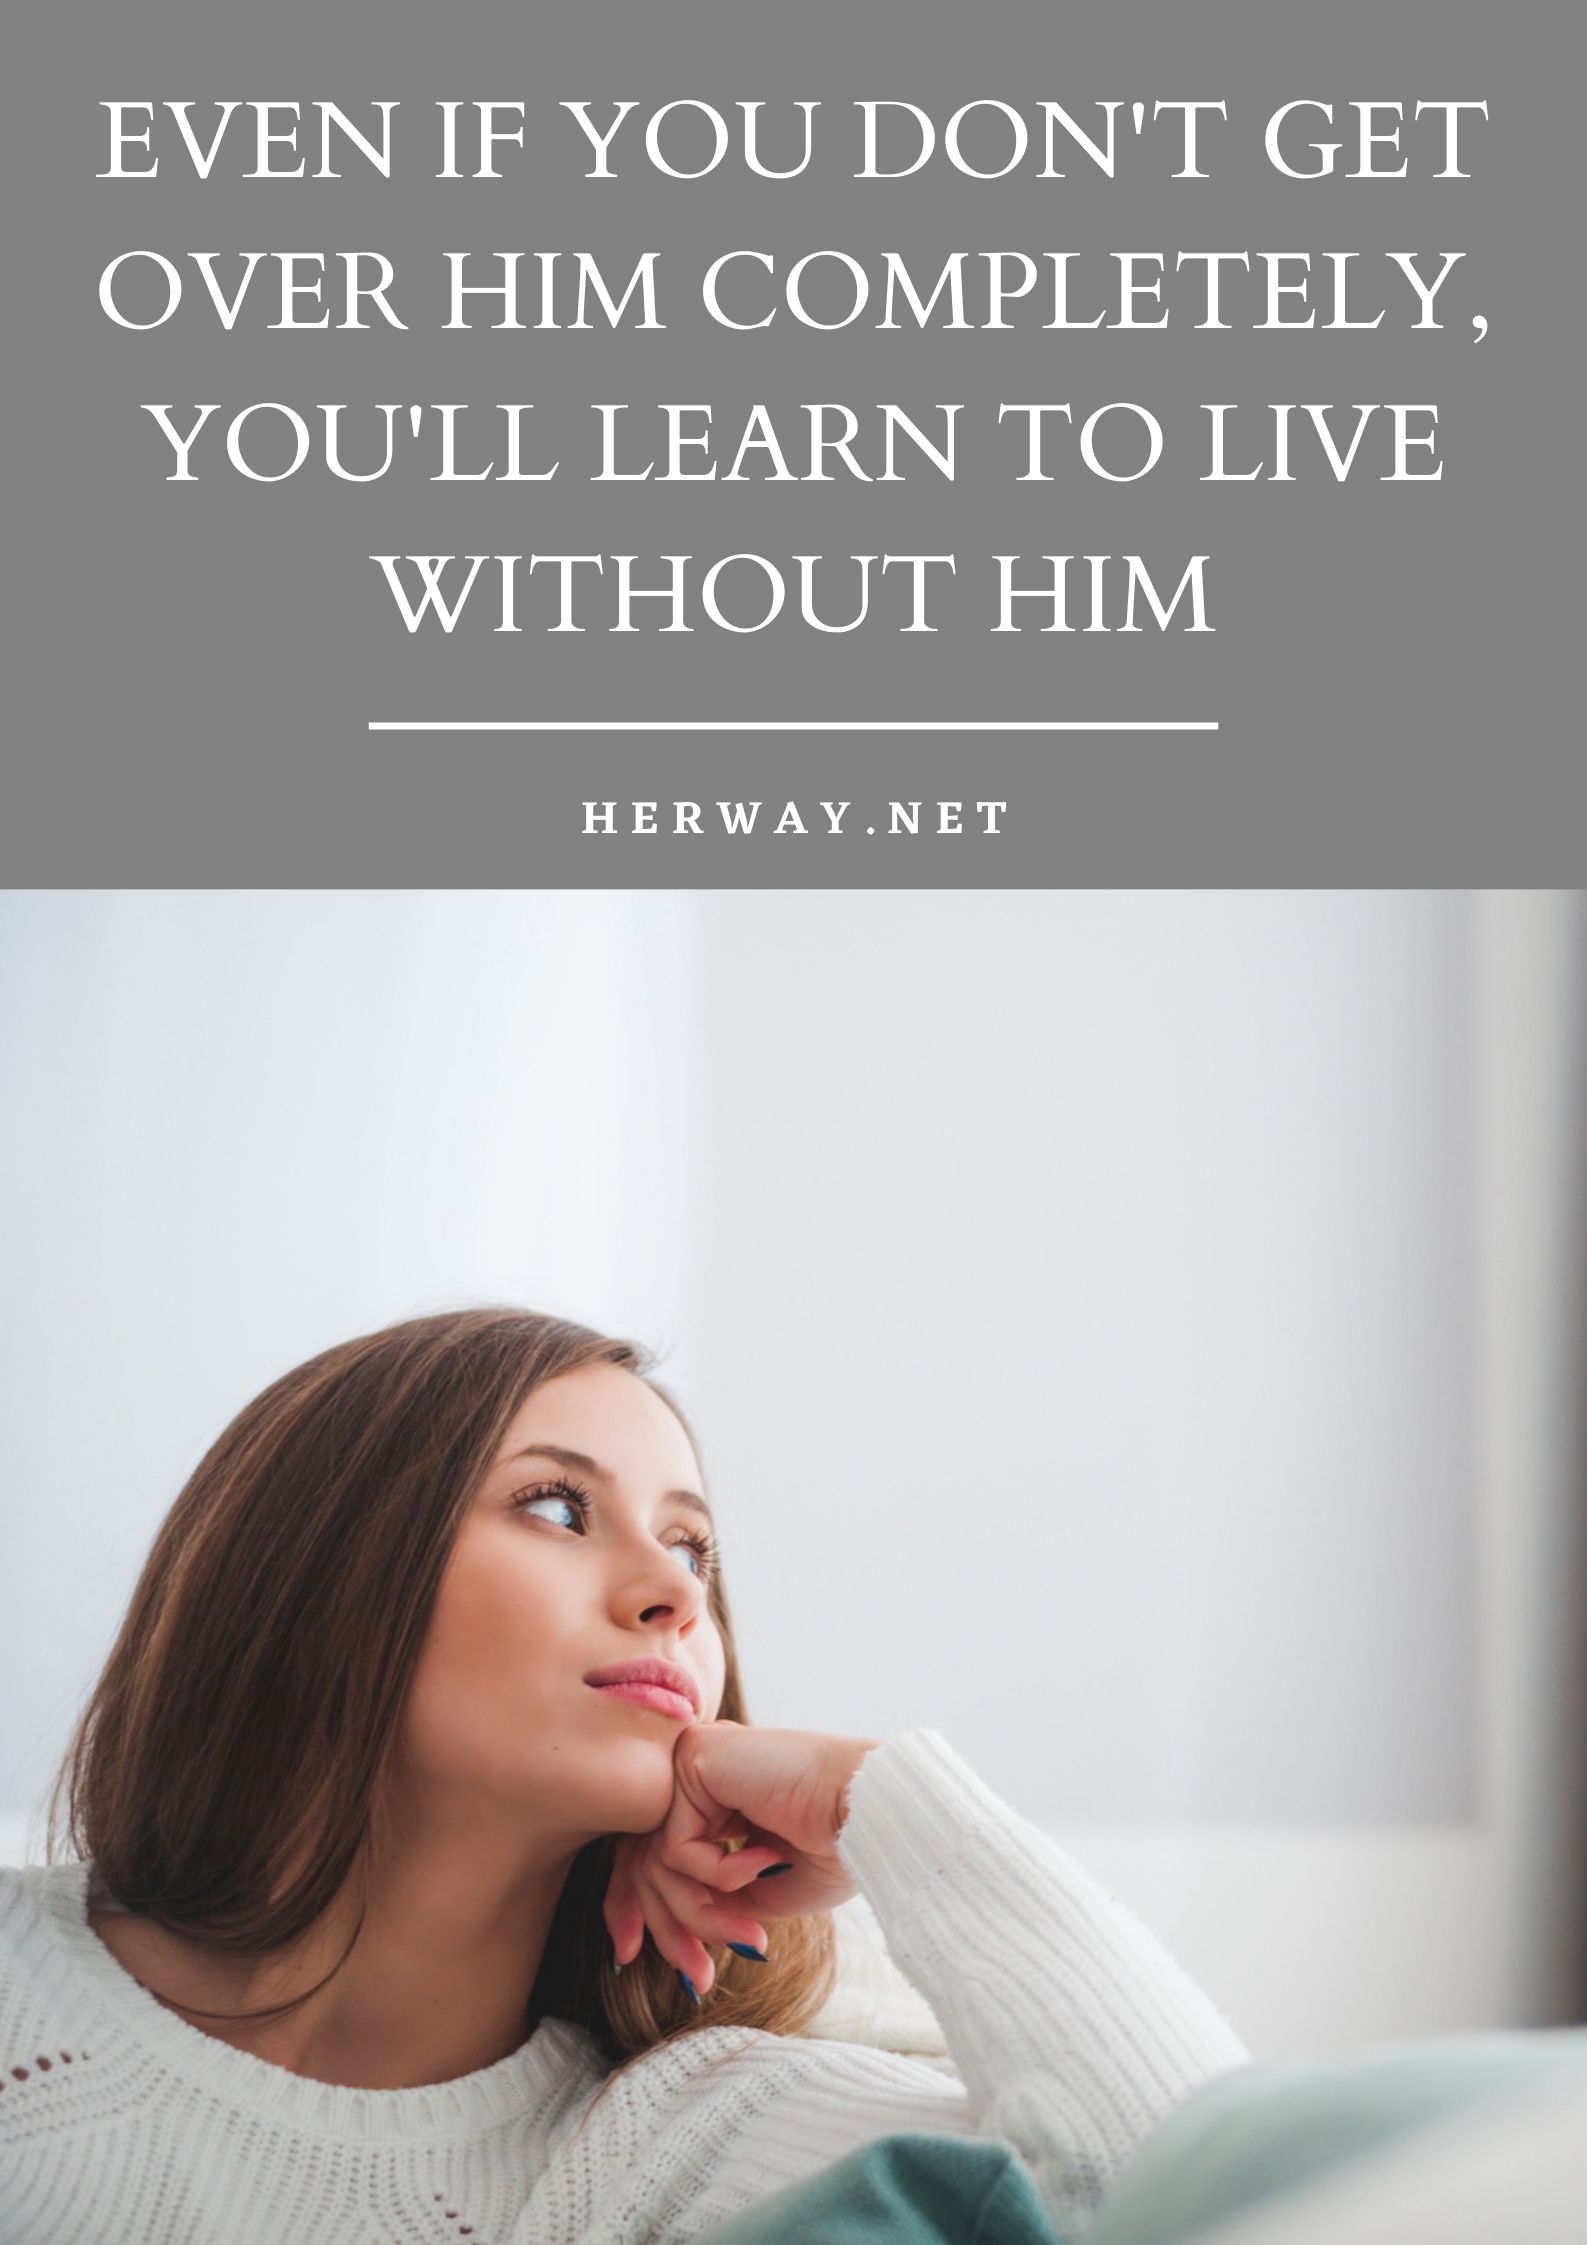 Even If You Don't Get Over Him Completely, You'll Learn To Live Without Him